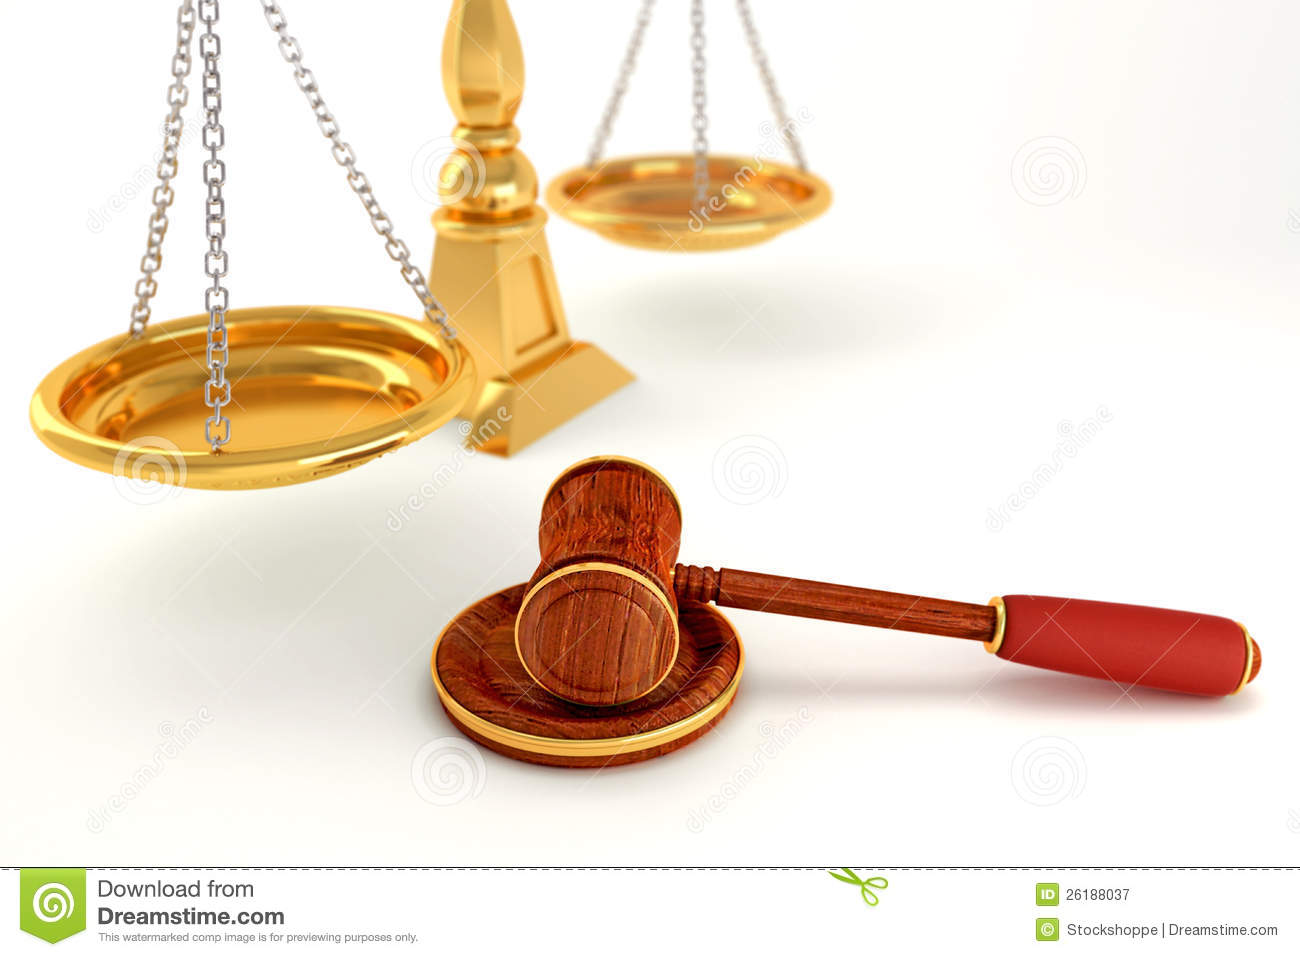 Free Clip Art Gavels Or Weights Law Wooden Law Gavel With Scale